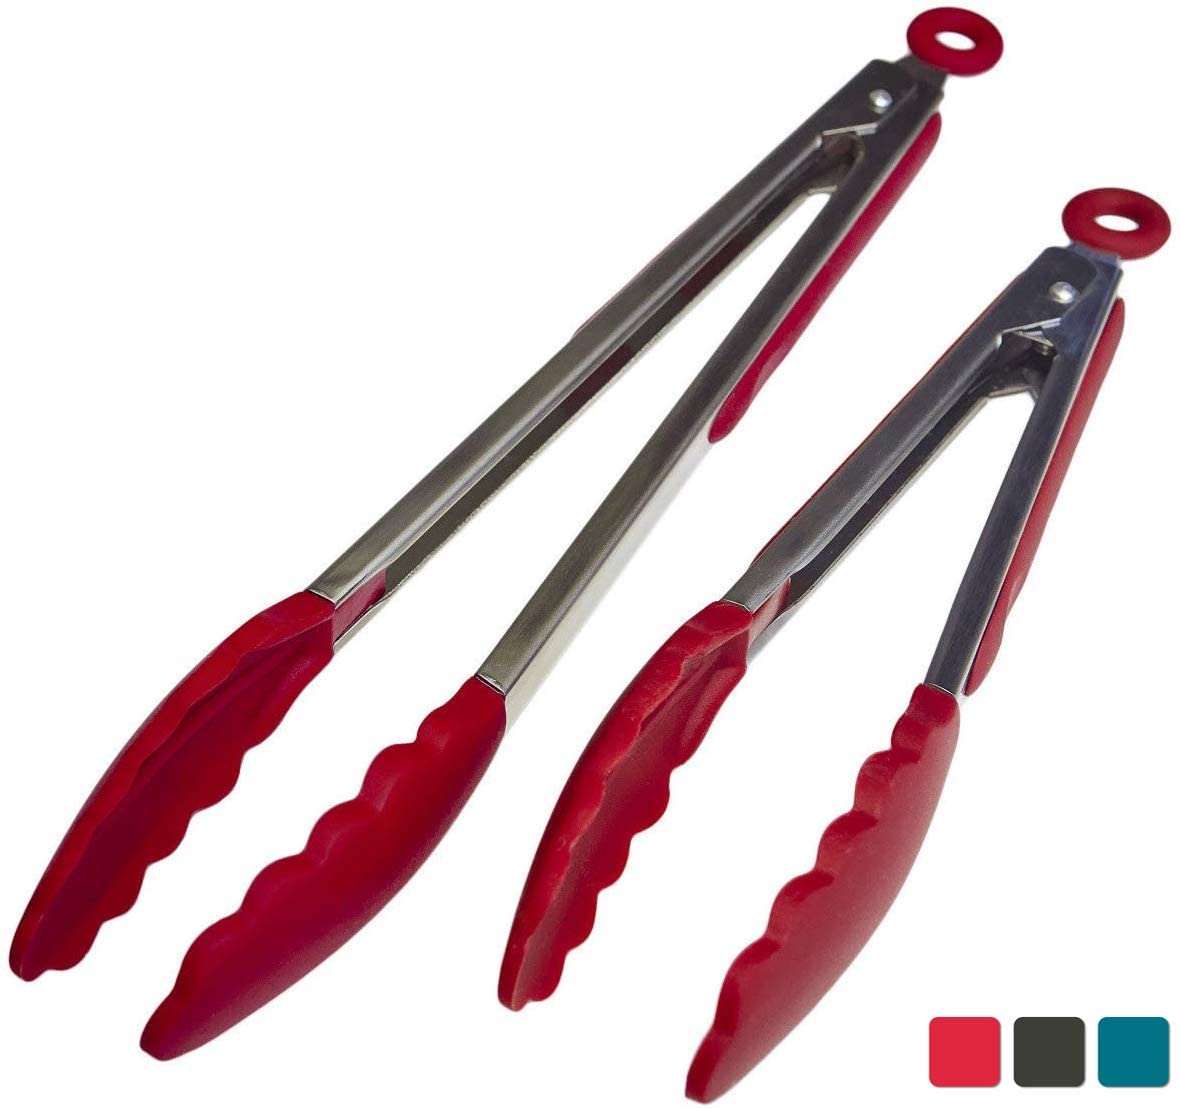 http://store.clevelandsightcenter.org/cdn/shop/products/Kitchensiliconetongs_1200x1200.jpg?v=1631548298